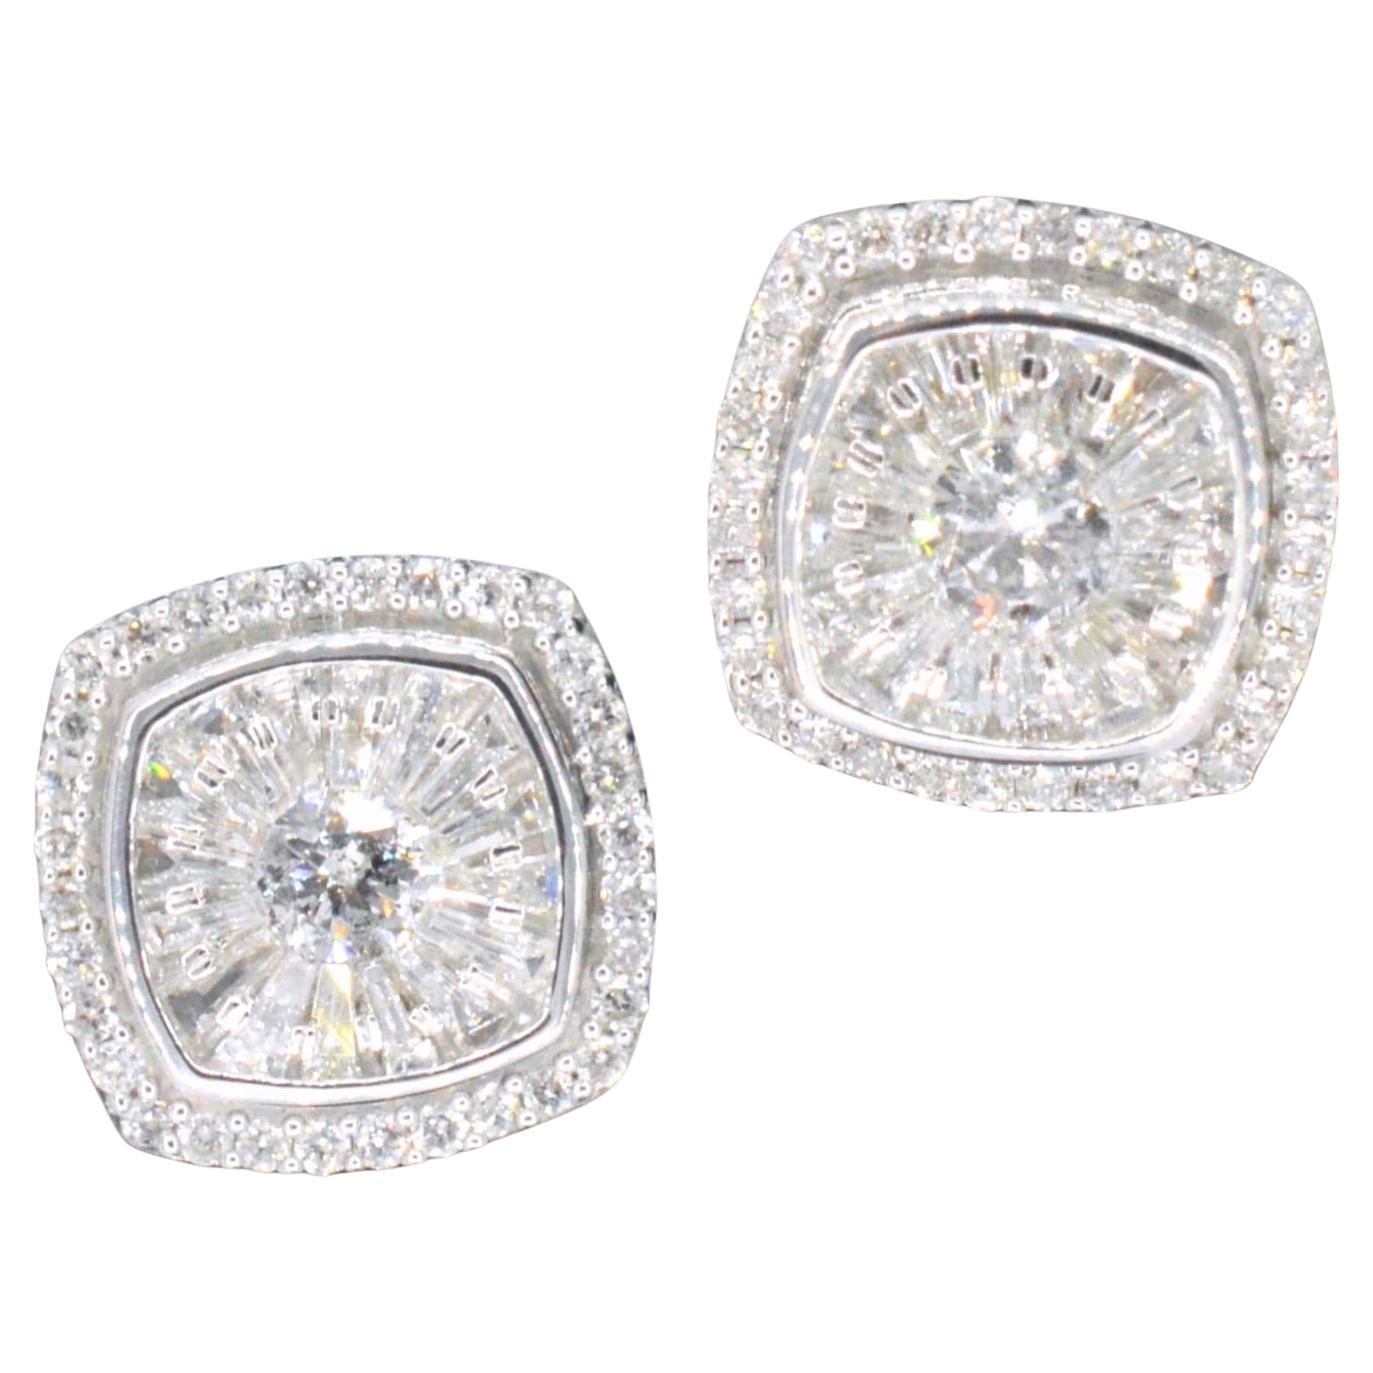 White Gold Entourage Earrings Set with 1.20 Carat For Sale